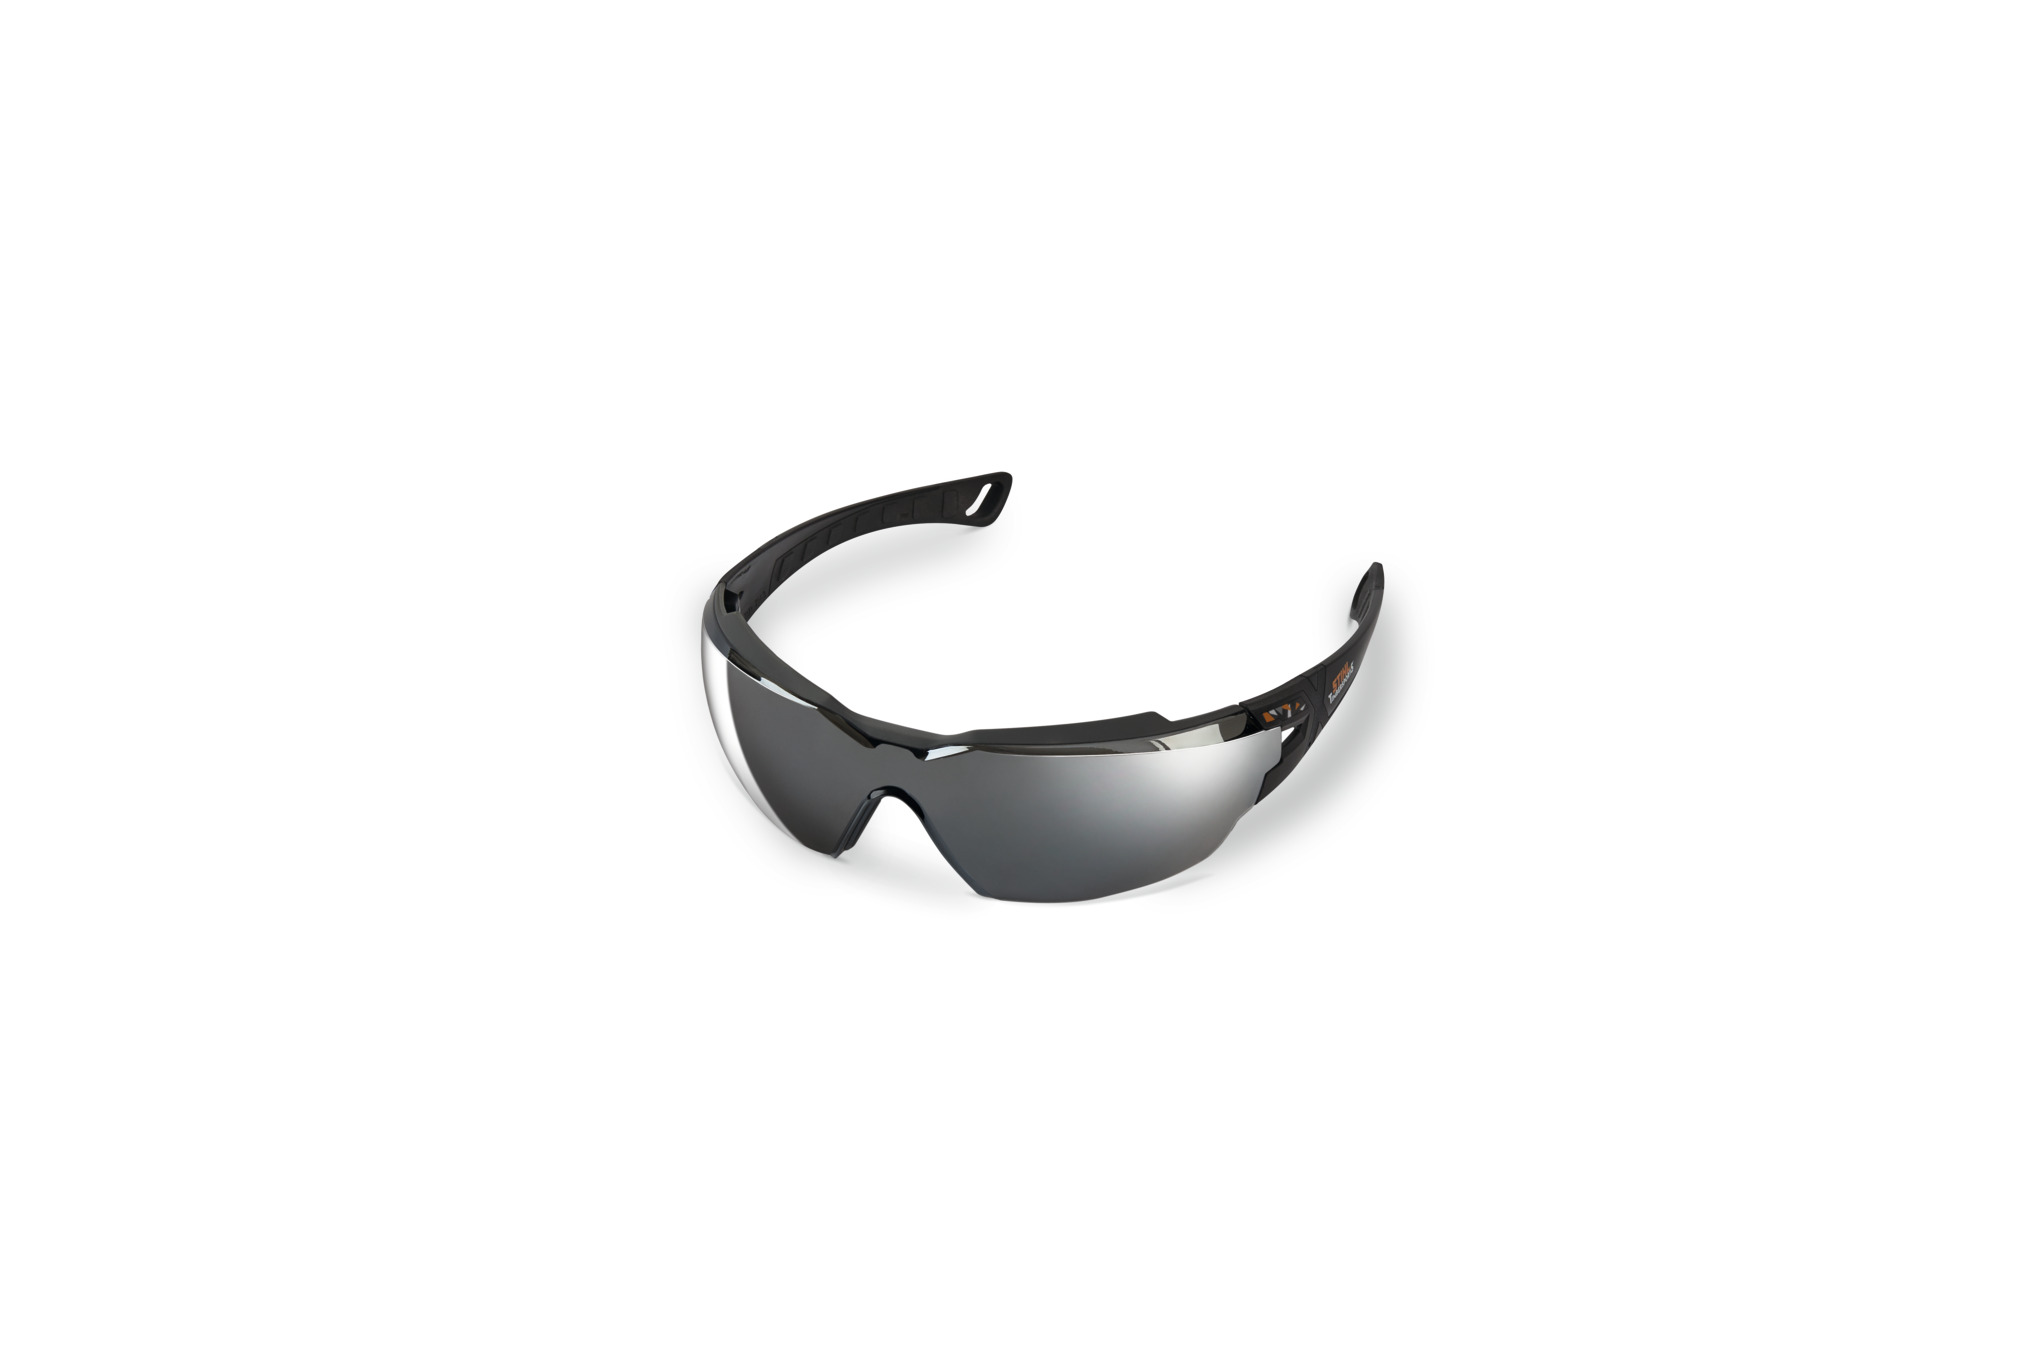 Lunettes de protection TIMBERSPORTS® Edition, effet mirroir